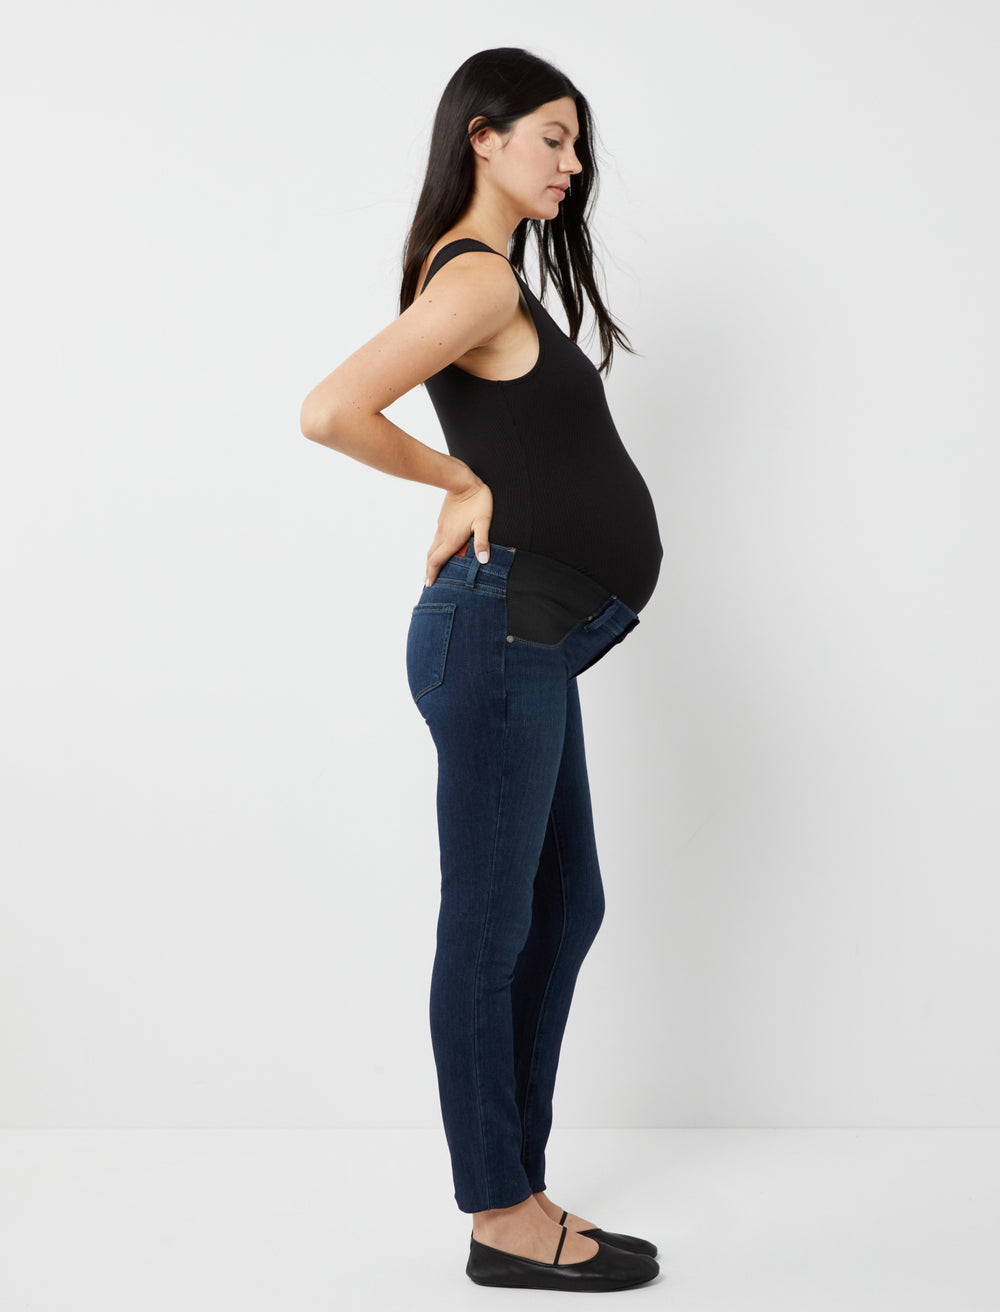 The 7 best disposable maternity briefs | Mum | Mother & Baby